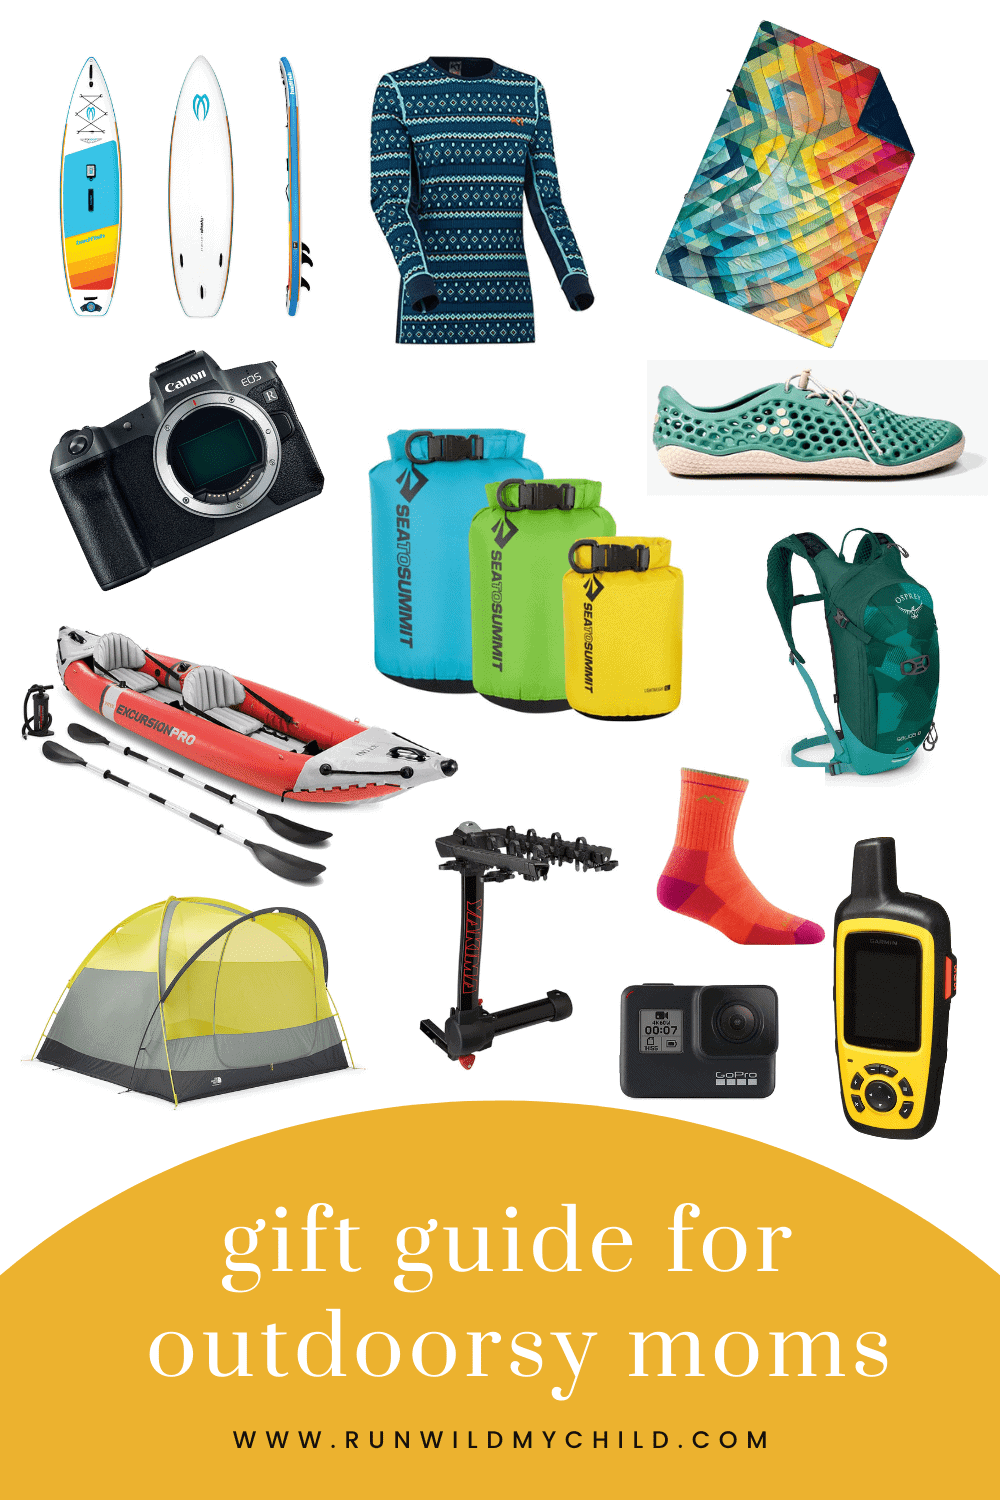 The Ultimate Non-Toy Gift Guide for Outdoorsy Kids